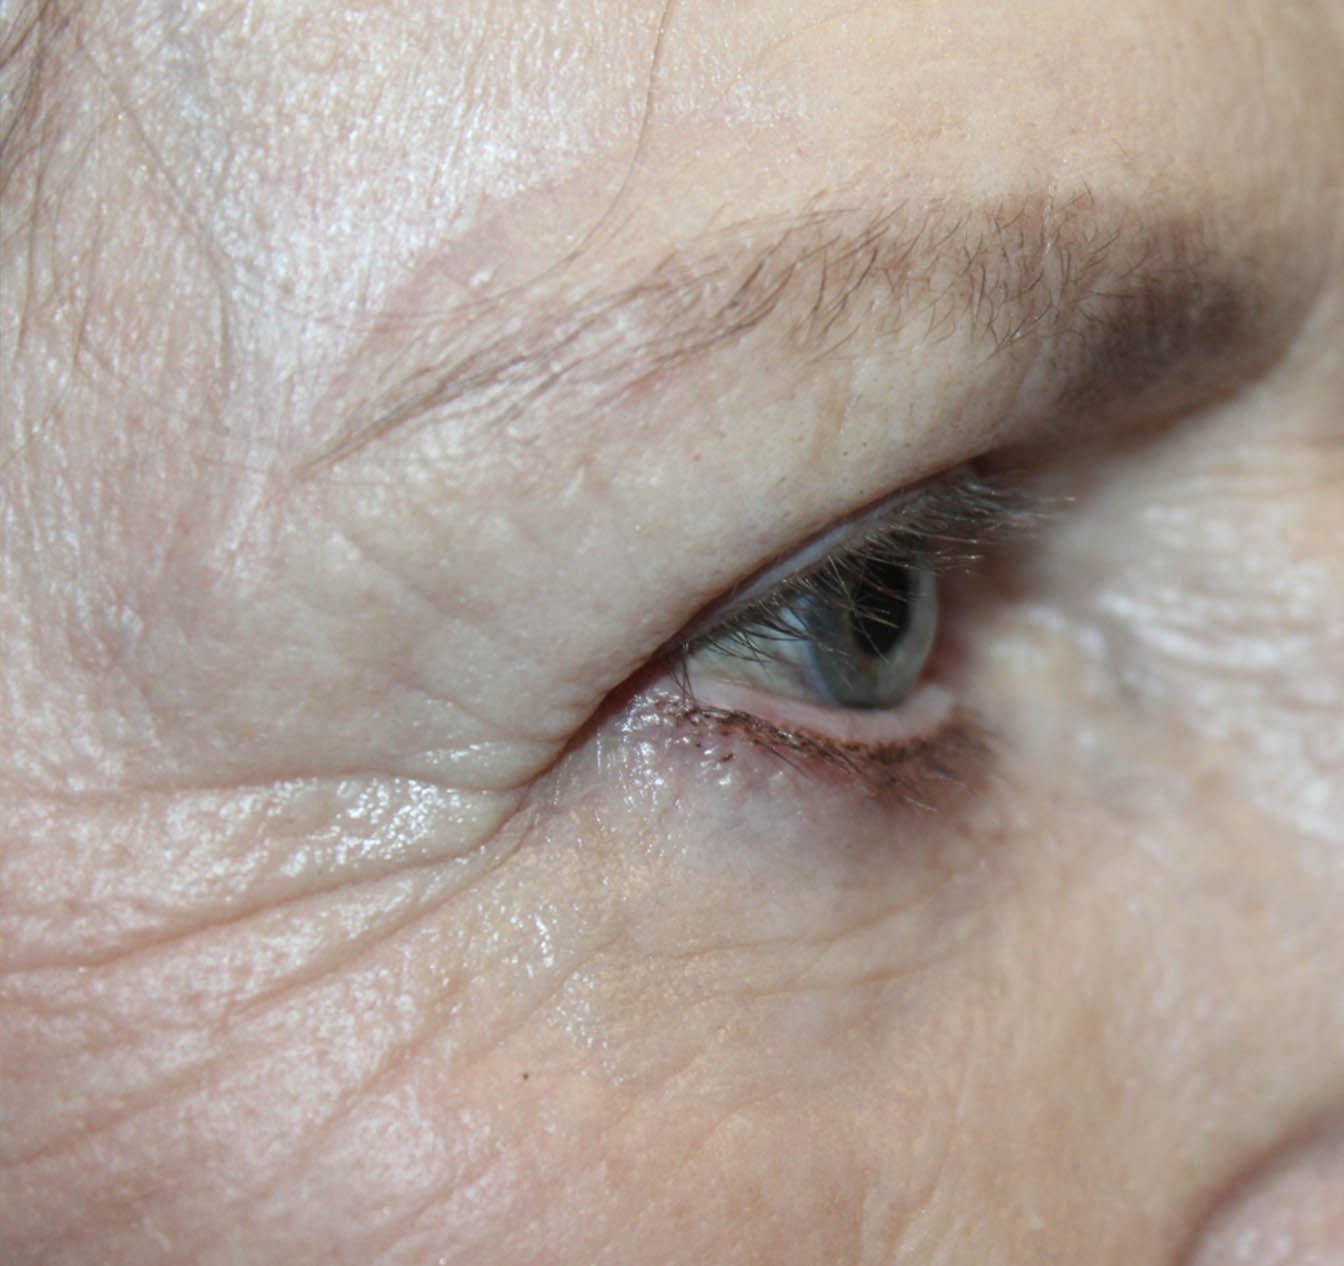 68 year old right eye after blepharoplasty